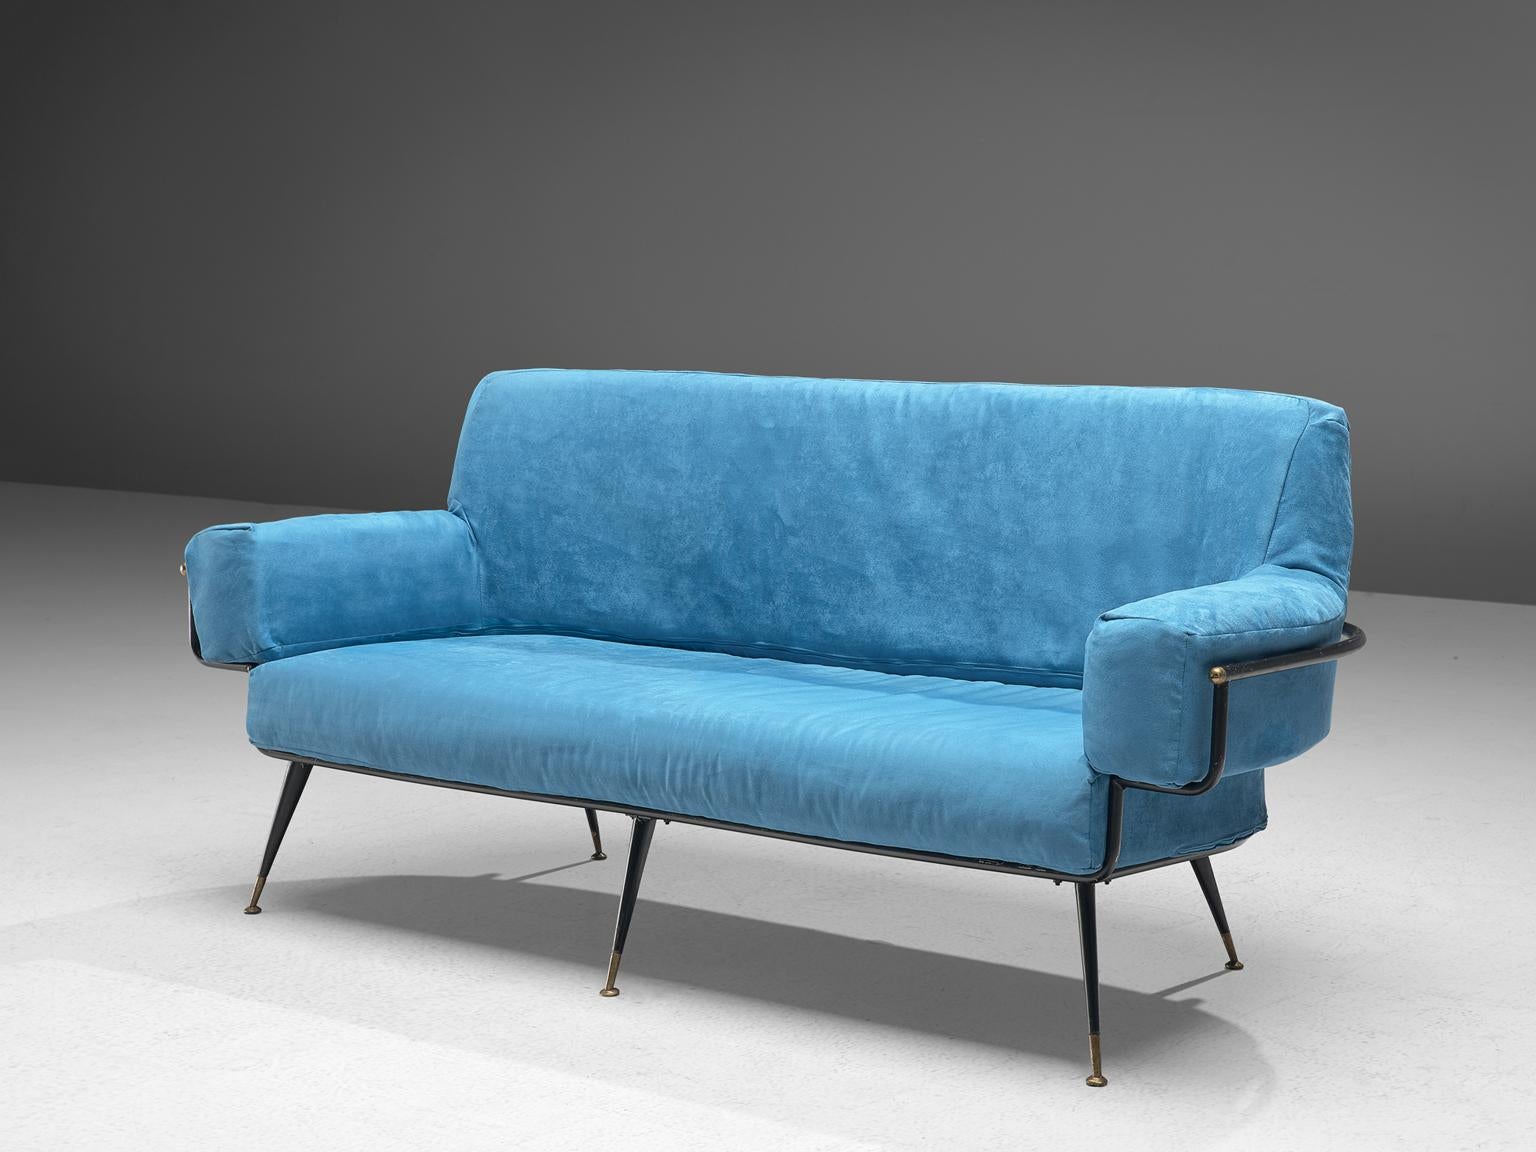 Italian Valla Rito Sofa with Metal Frame in Azure Blue Upholstery